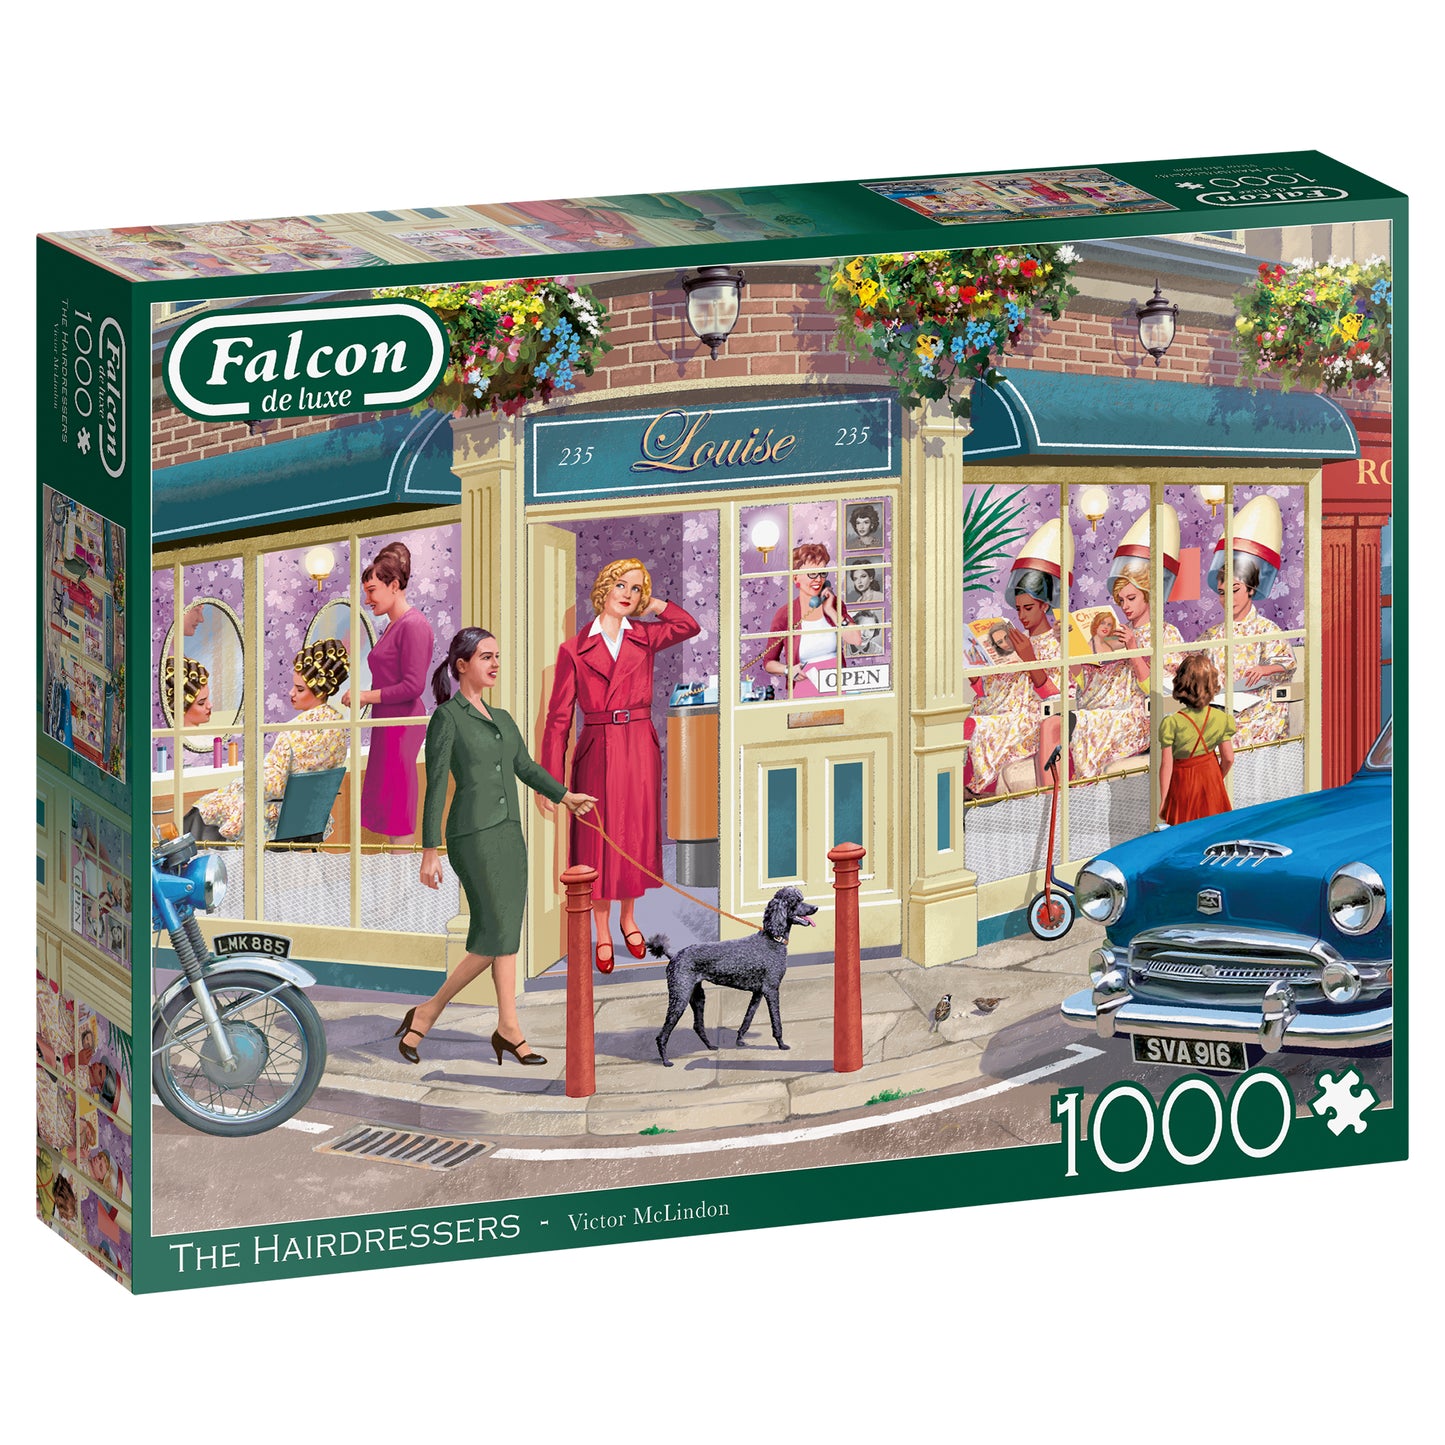 Falcon - The Hairdressers (1000 pieces) - product image - Jumboplay.com